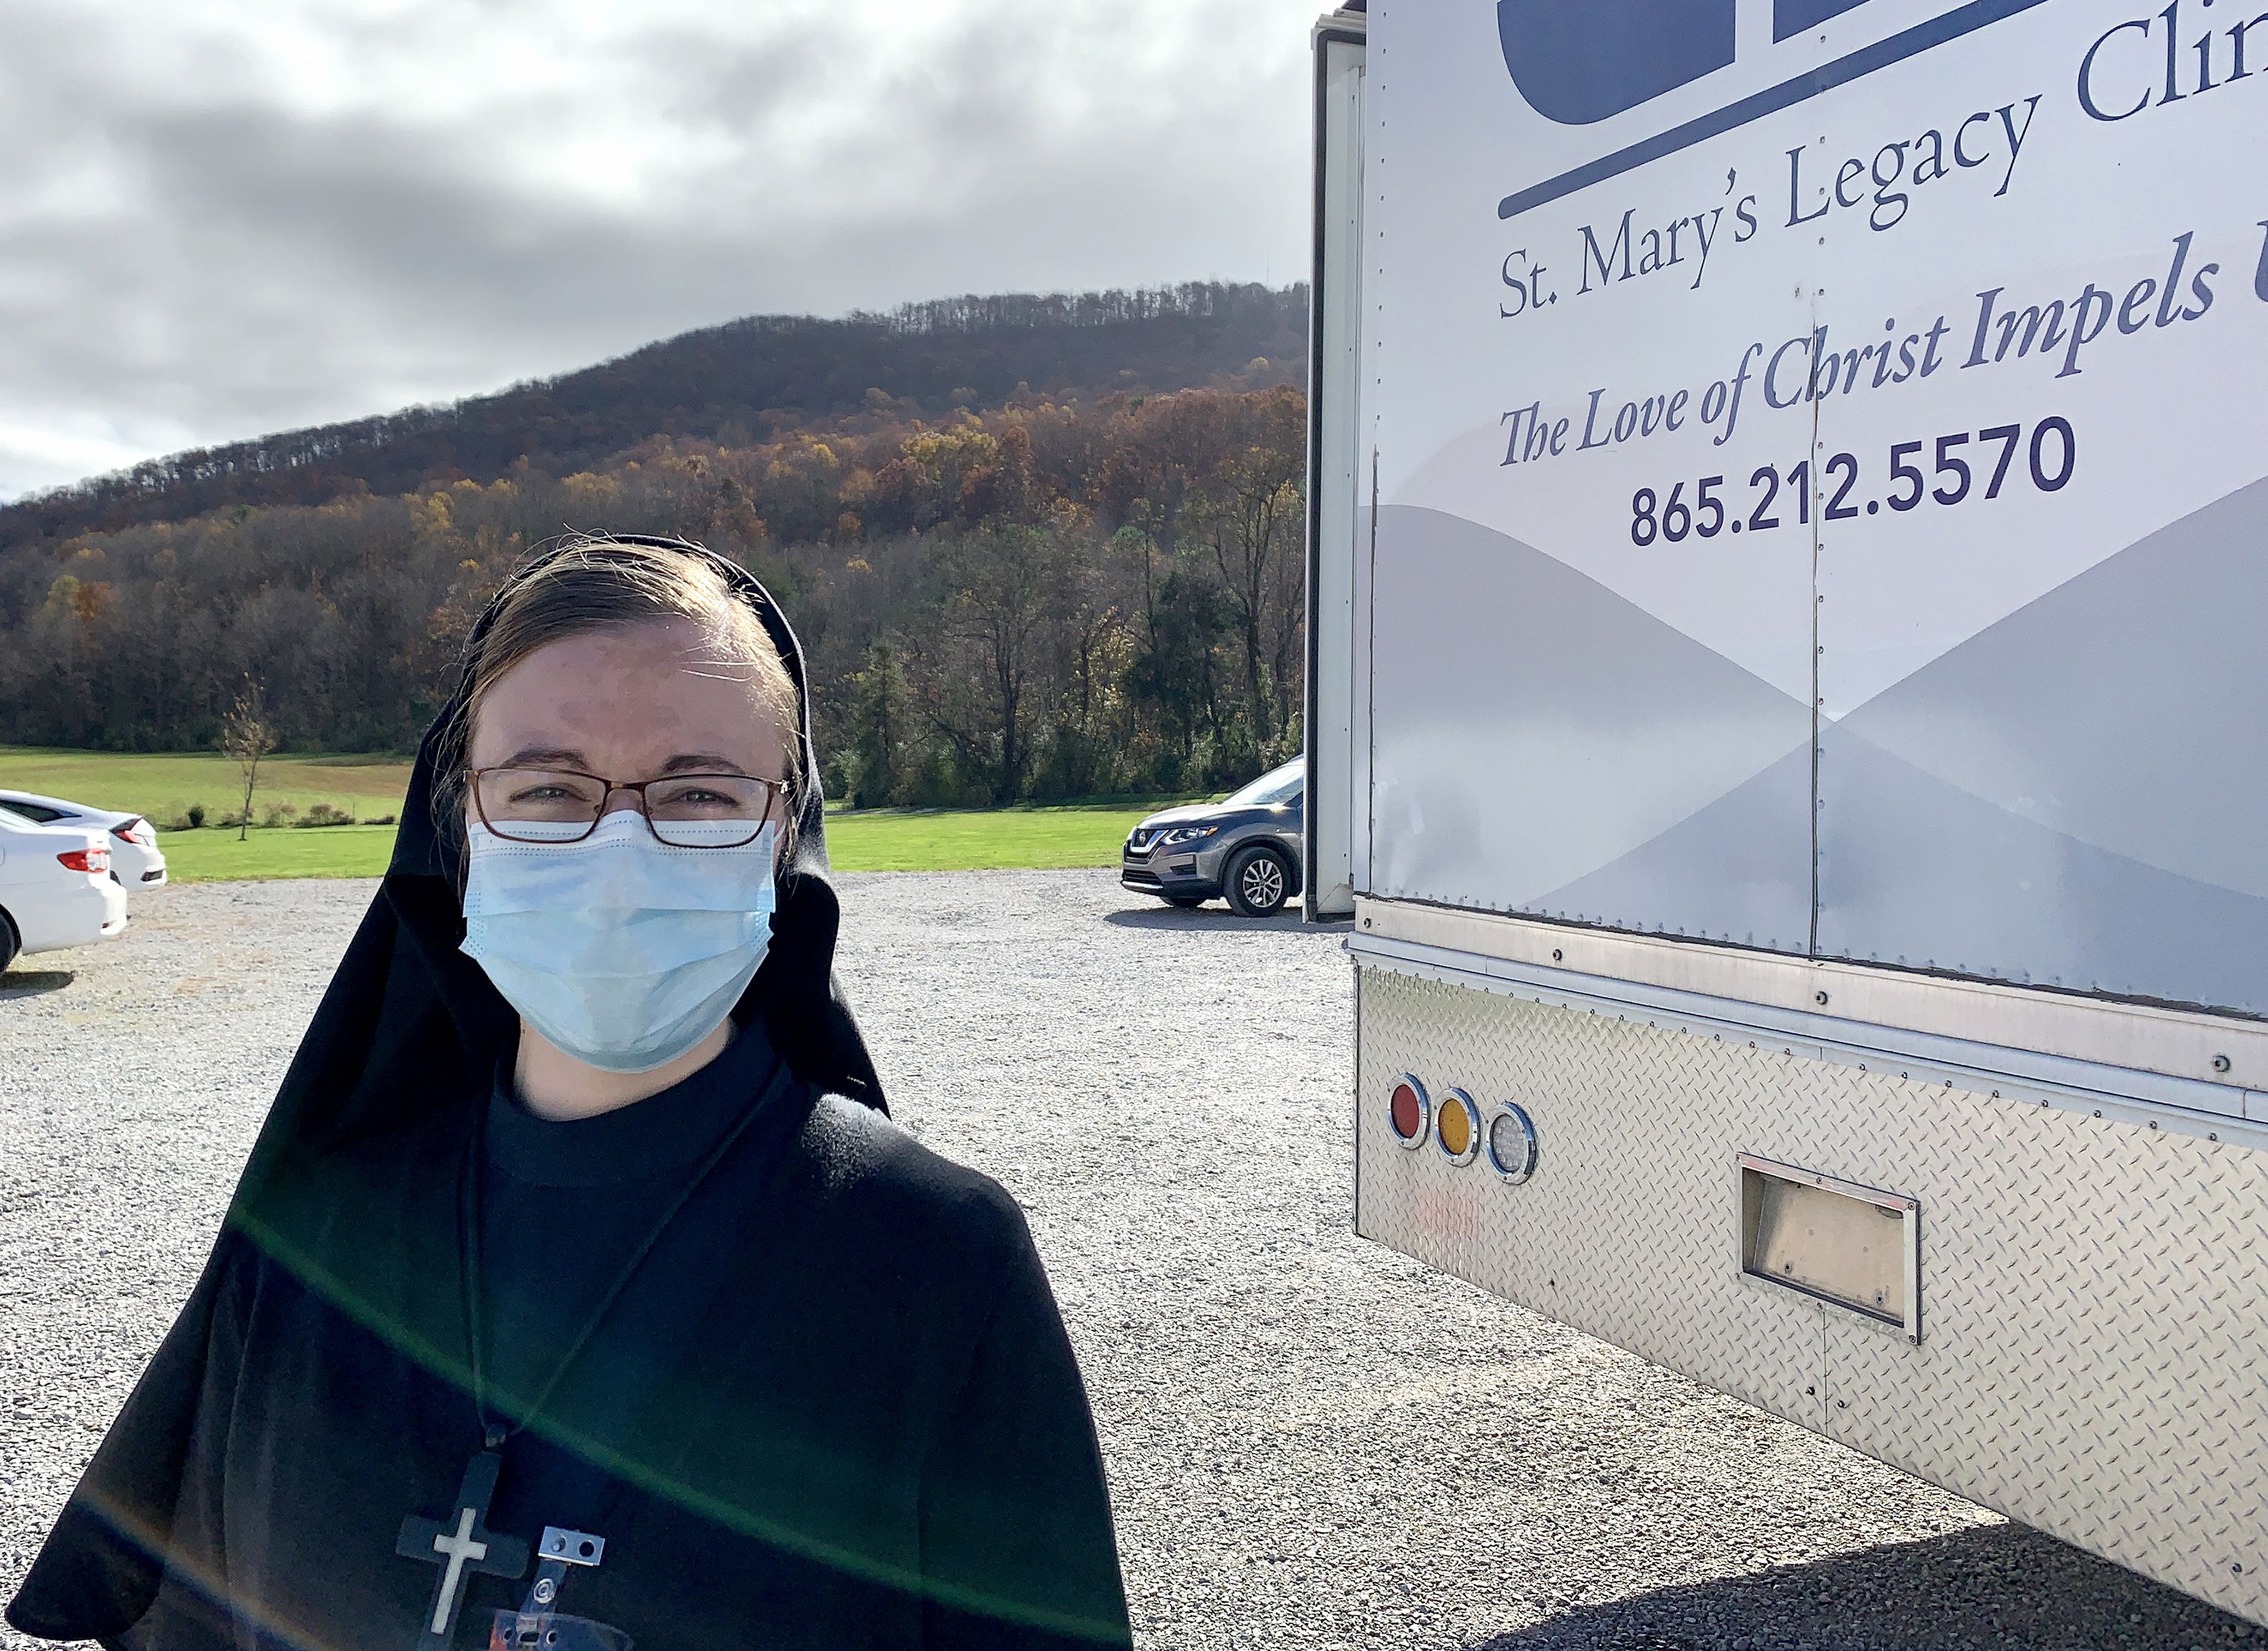 Sister Mary Lisa Renfer, director of the St. Mary's Legacy Clinic, at Crab Orchard Christian Church in rural East Tennessee. Image by Bob Smietana/Religion News Service. United States, 2020.